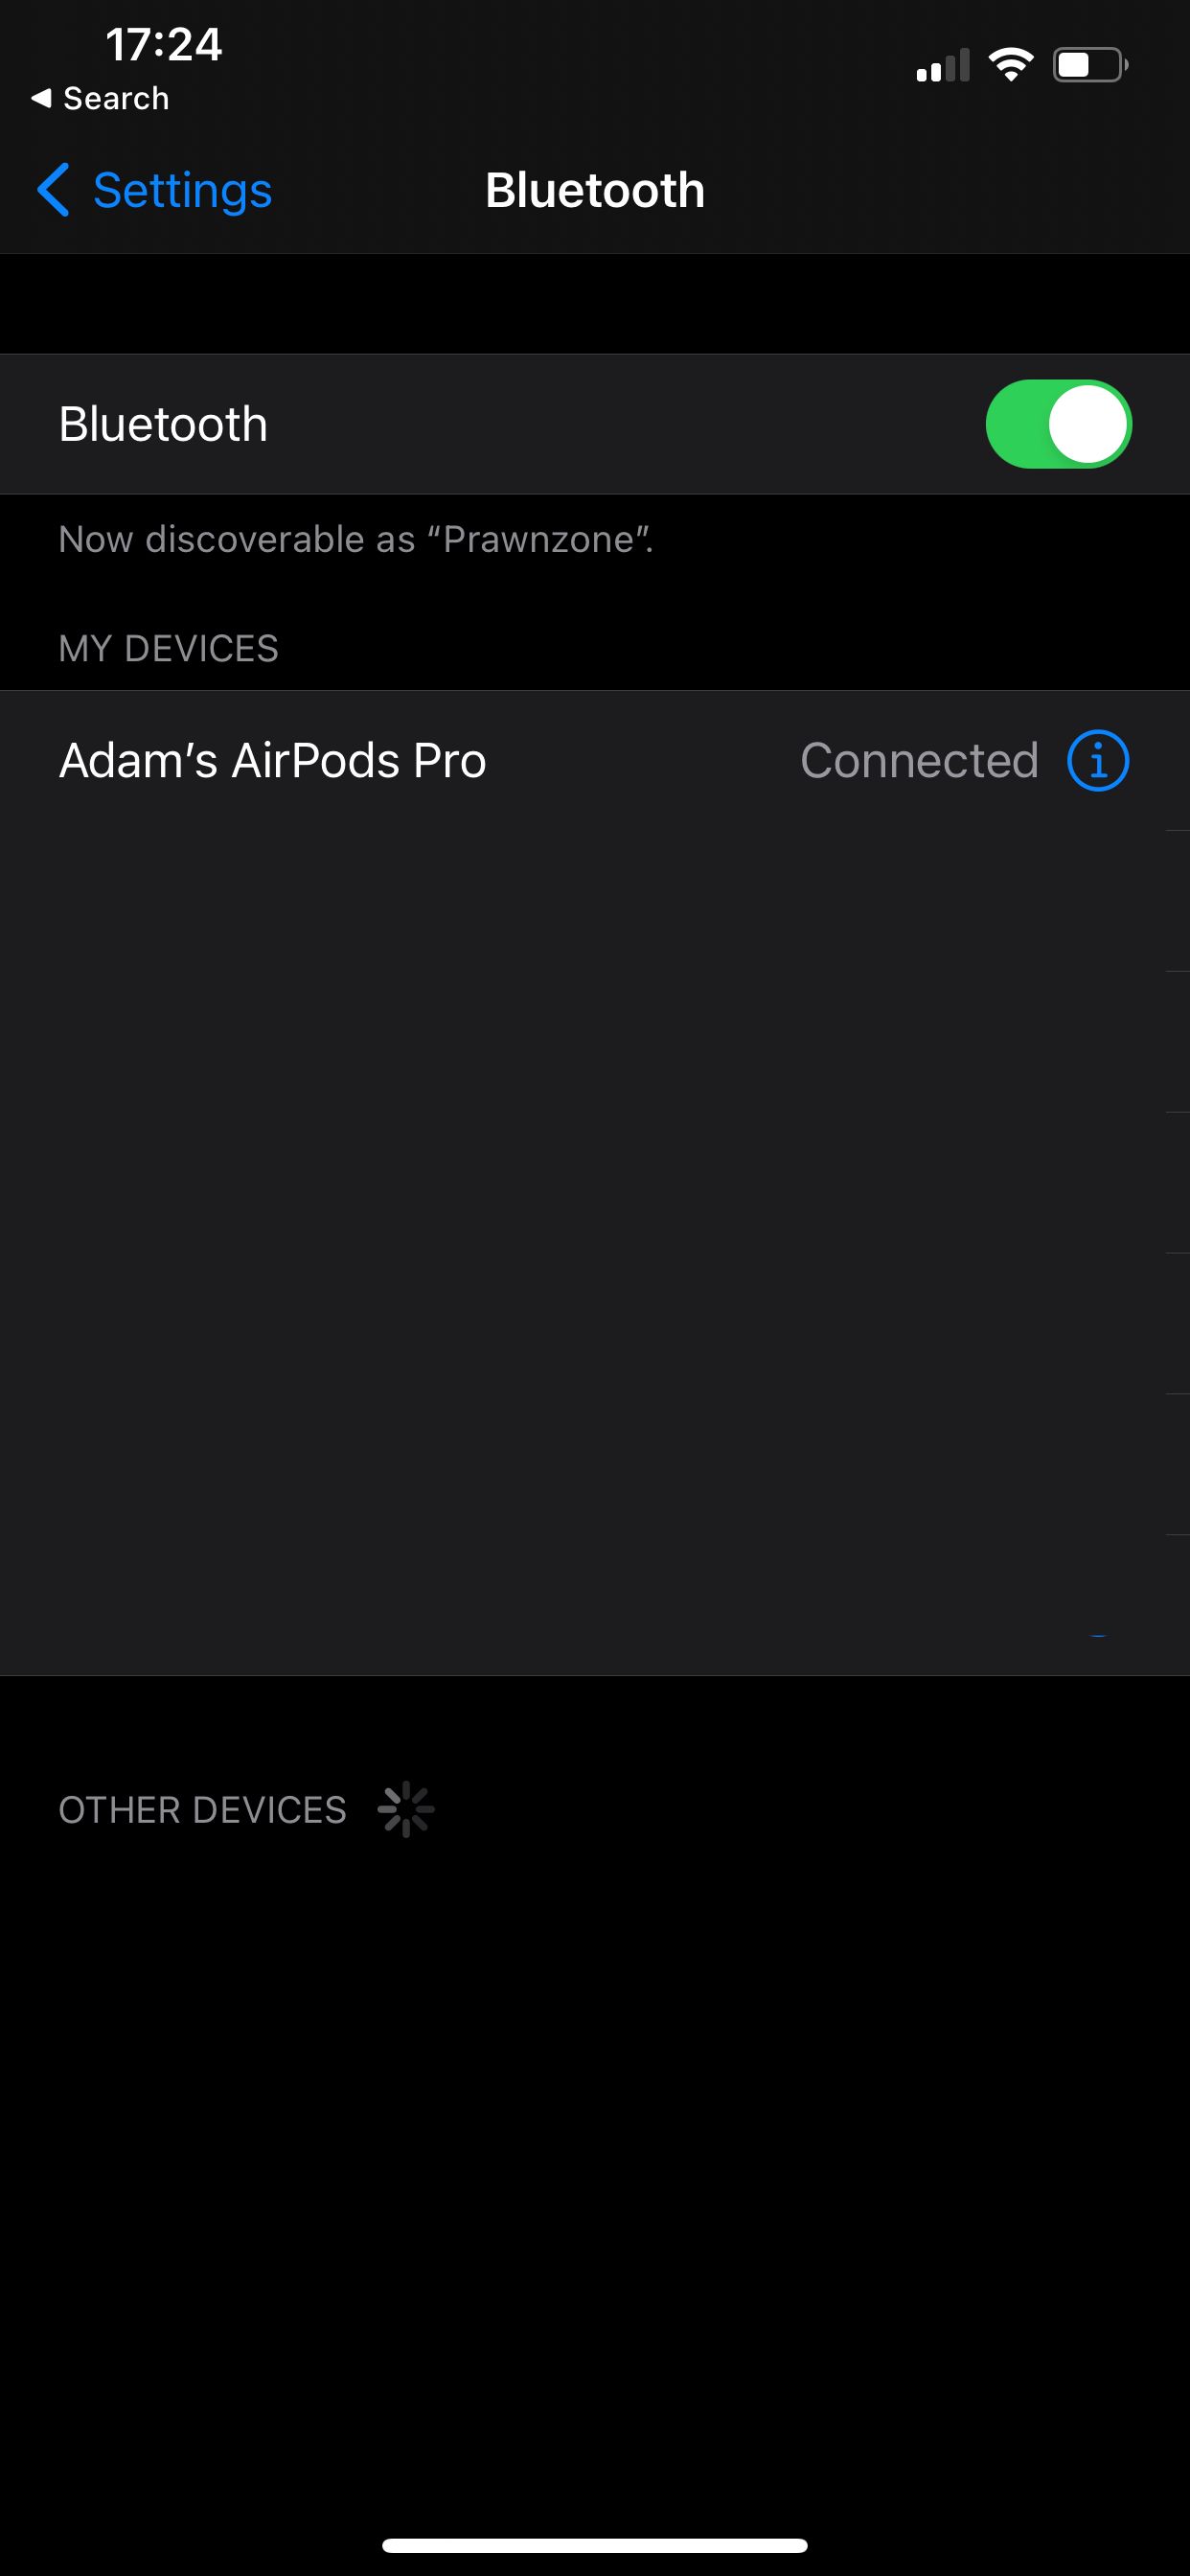 Bluetooth page in iPhone Settings